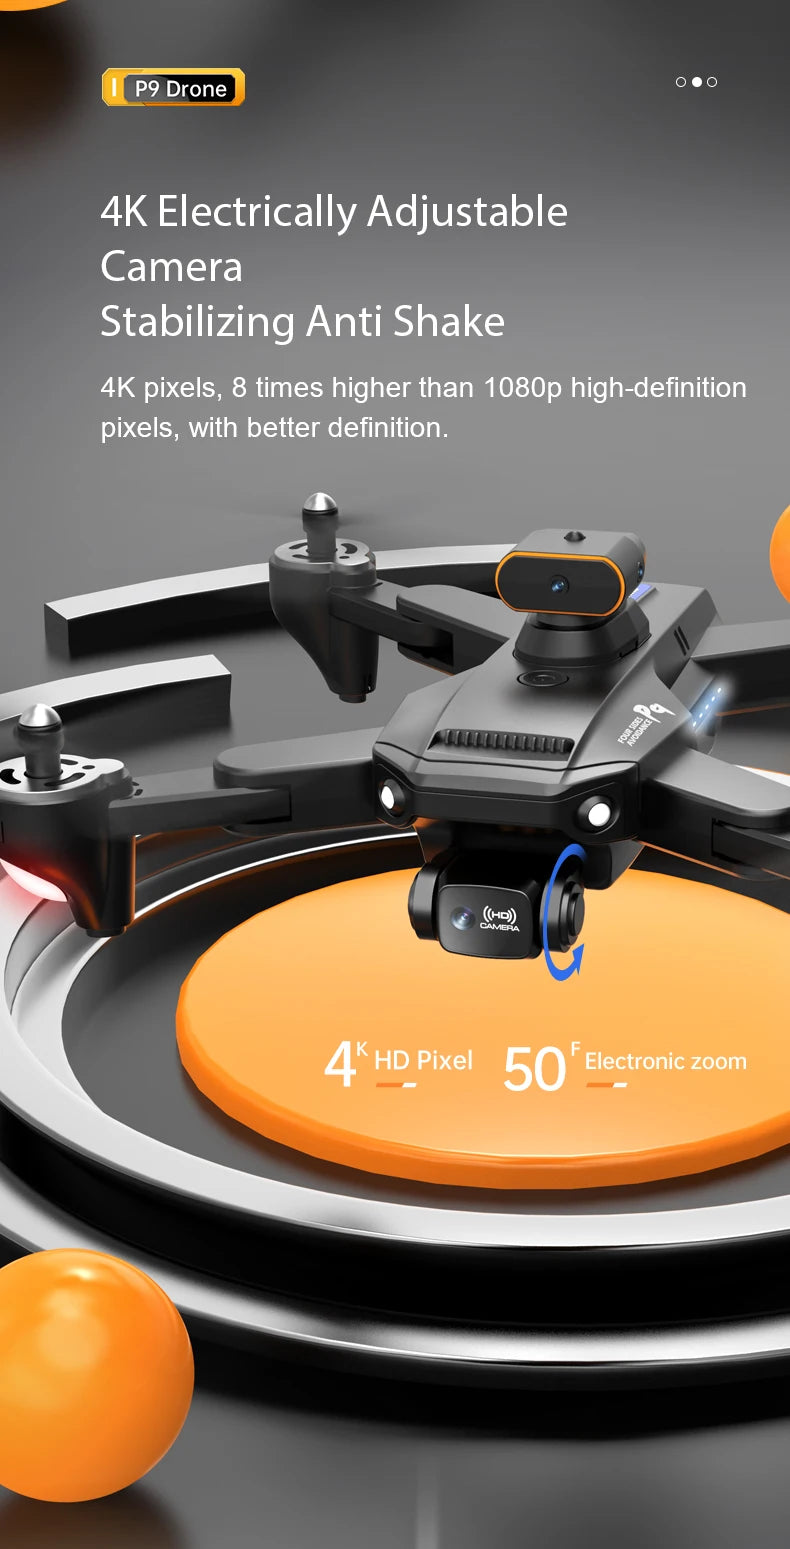 P9 Drone, 8 times higher than 108op high-definition pixels